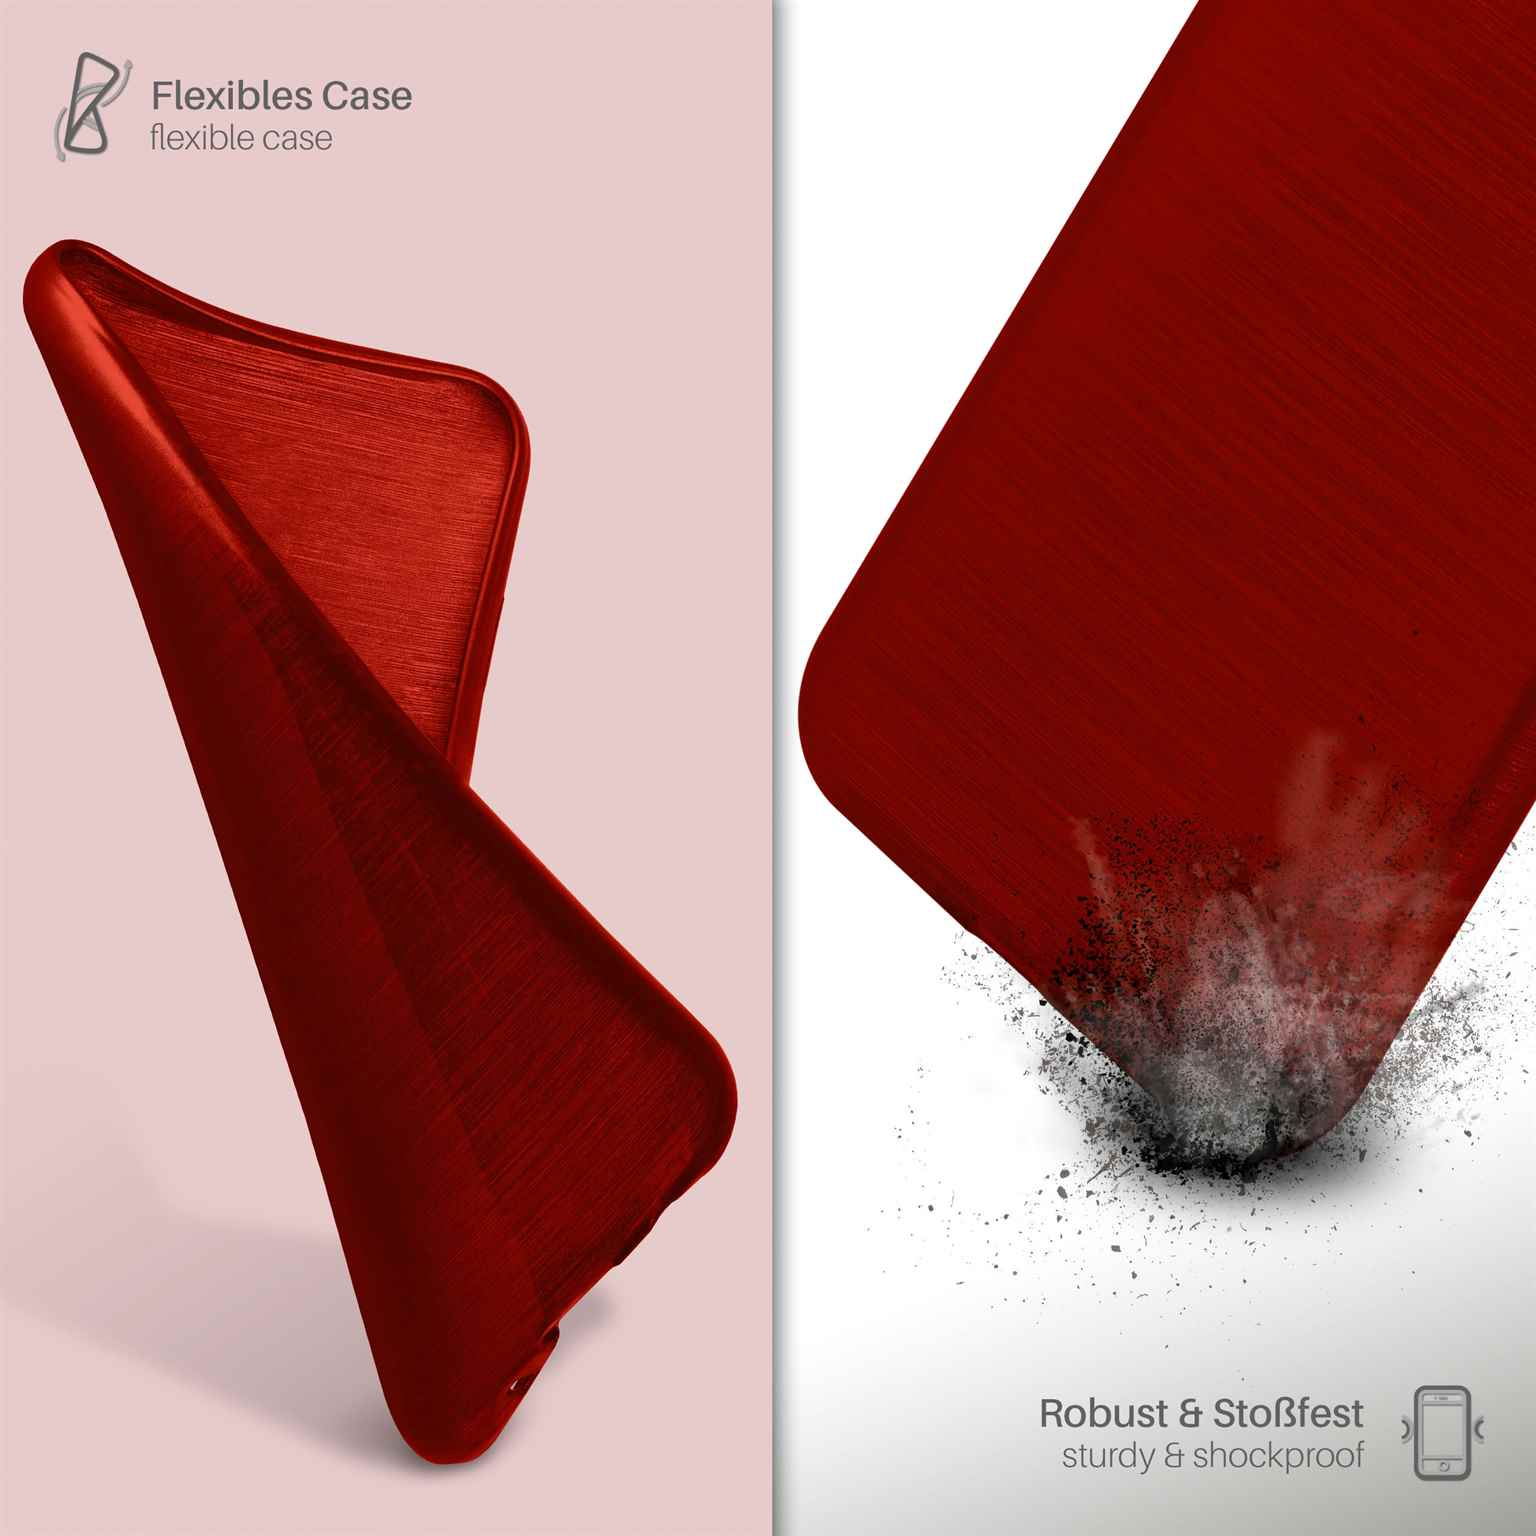 Case, MOEX S6, Samsung, Backcover, Brushed Crimson-Red Galaxy